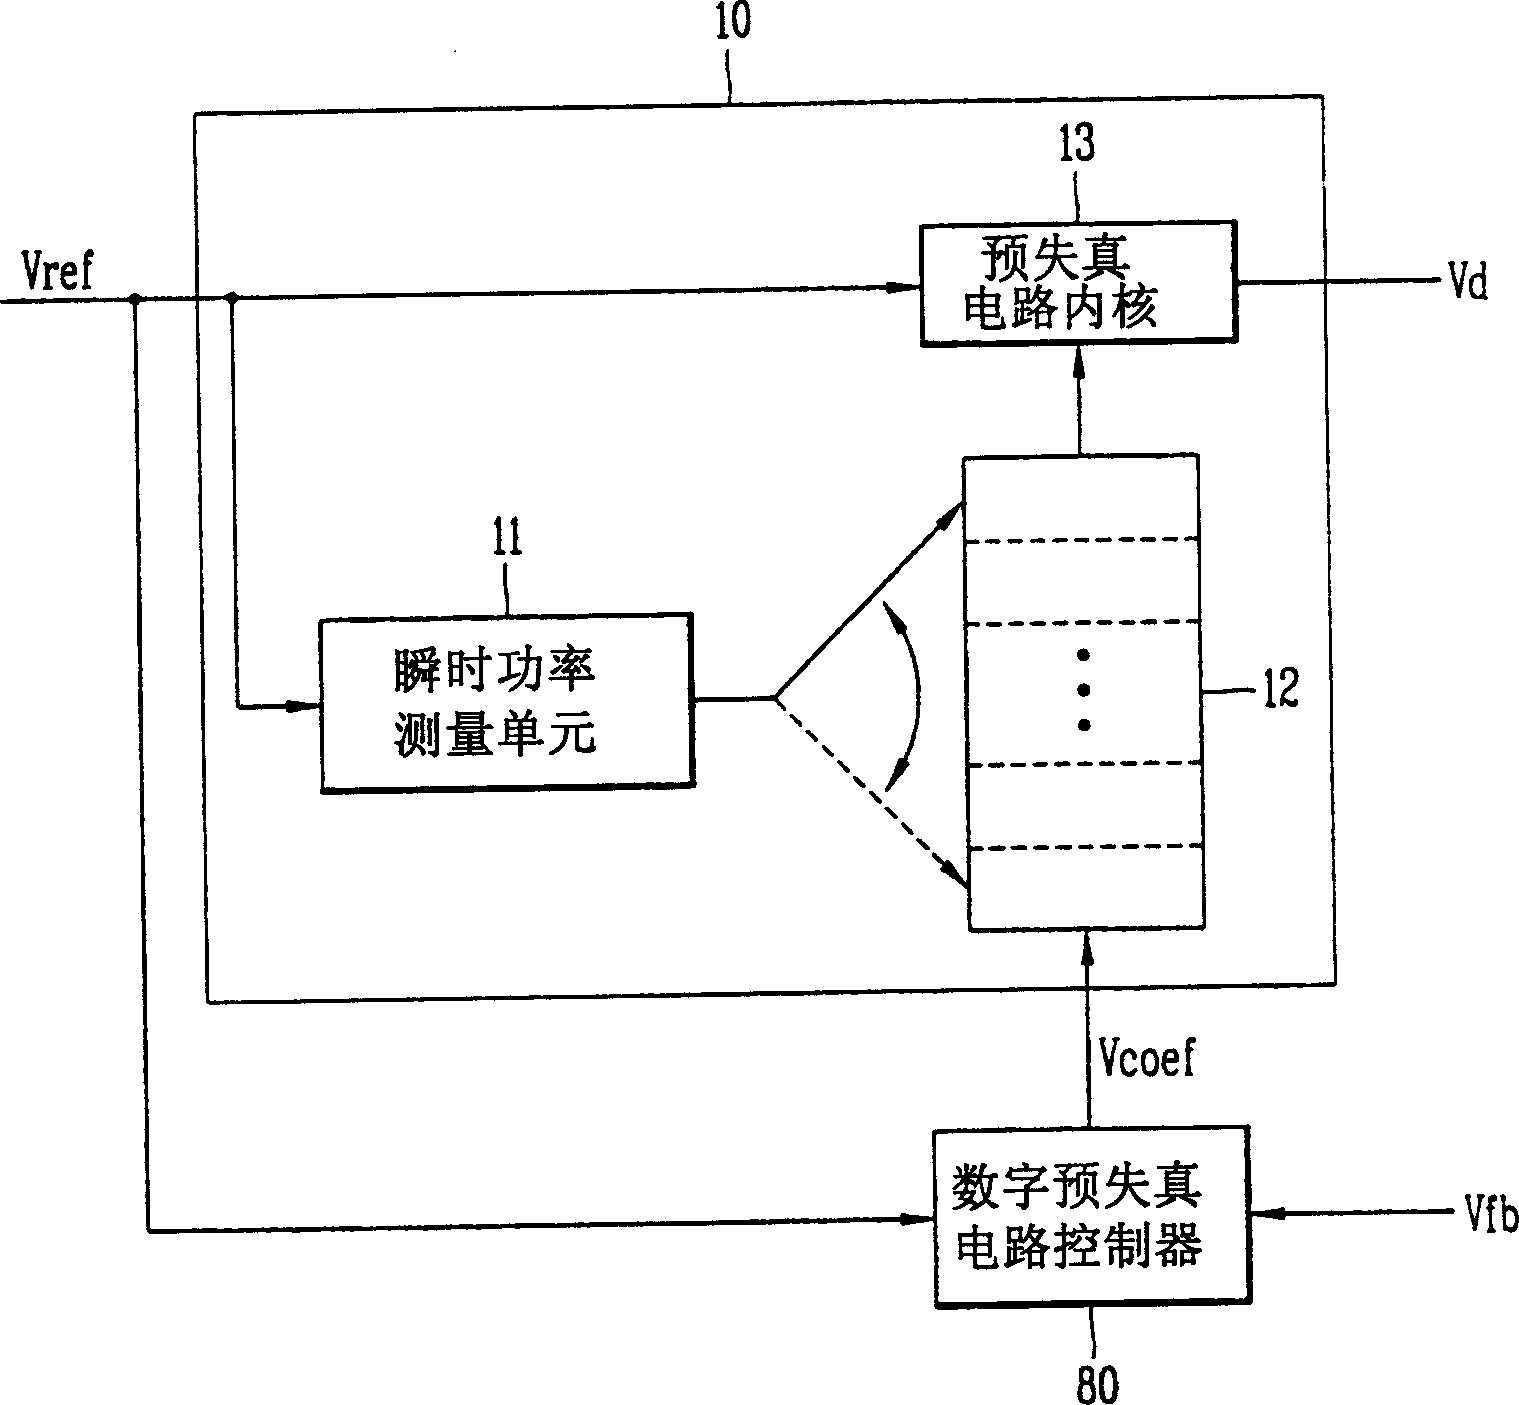 Device and method of pre-distorsion for compensating power amplifier